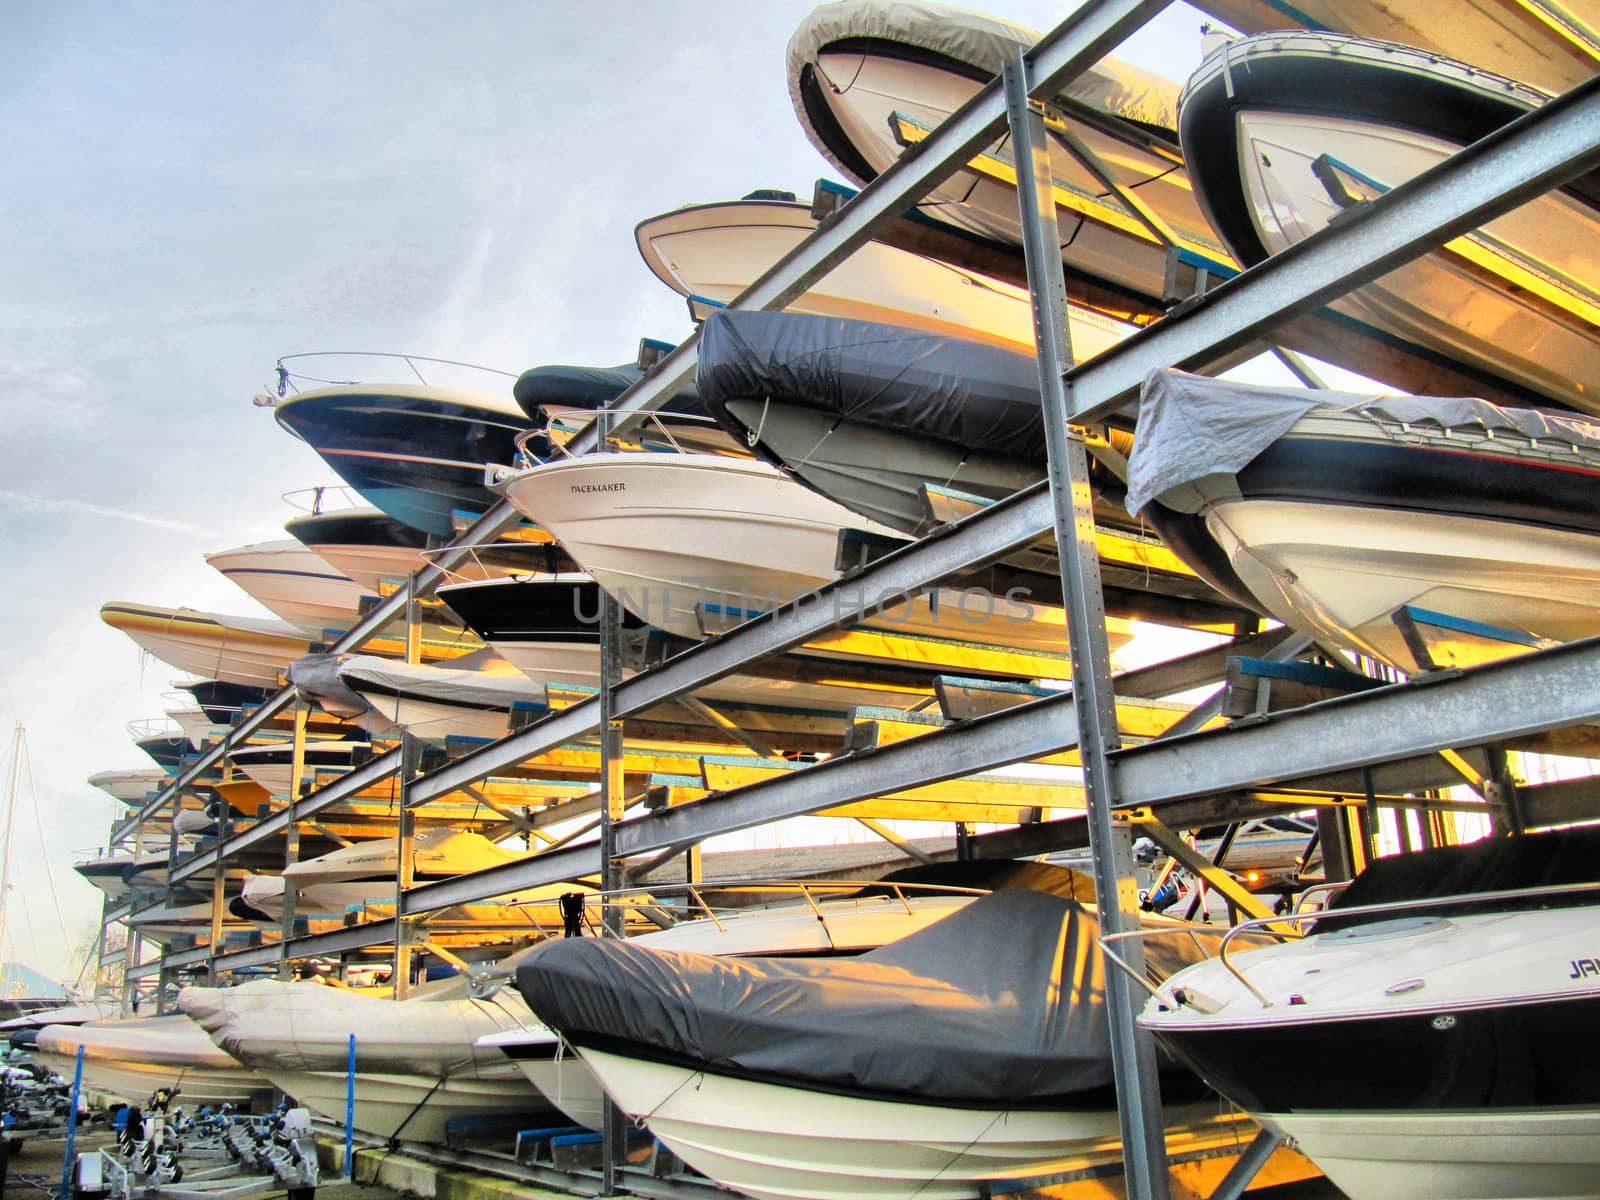 A rack of speed boats waiting for the water.